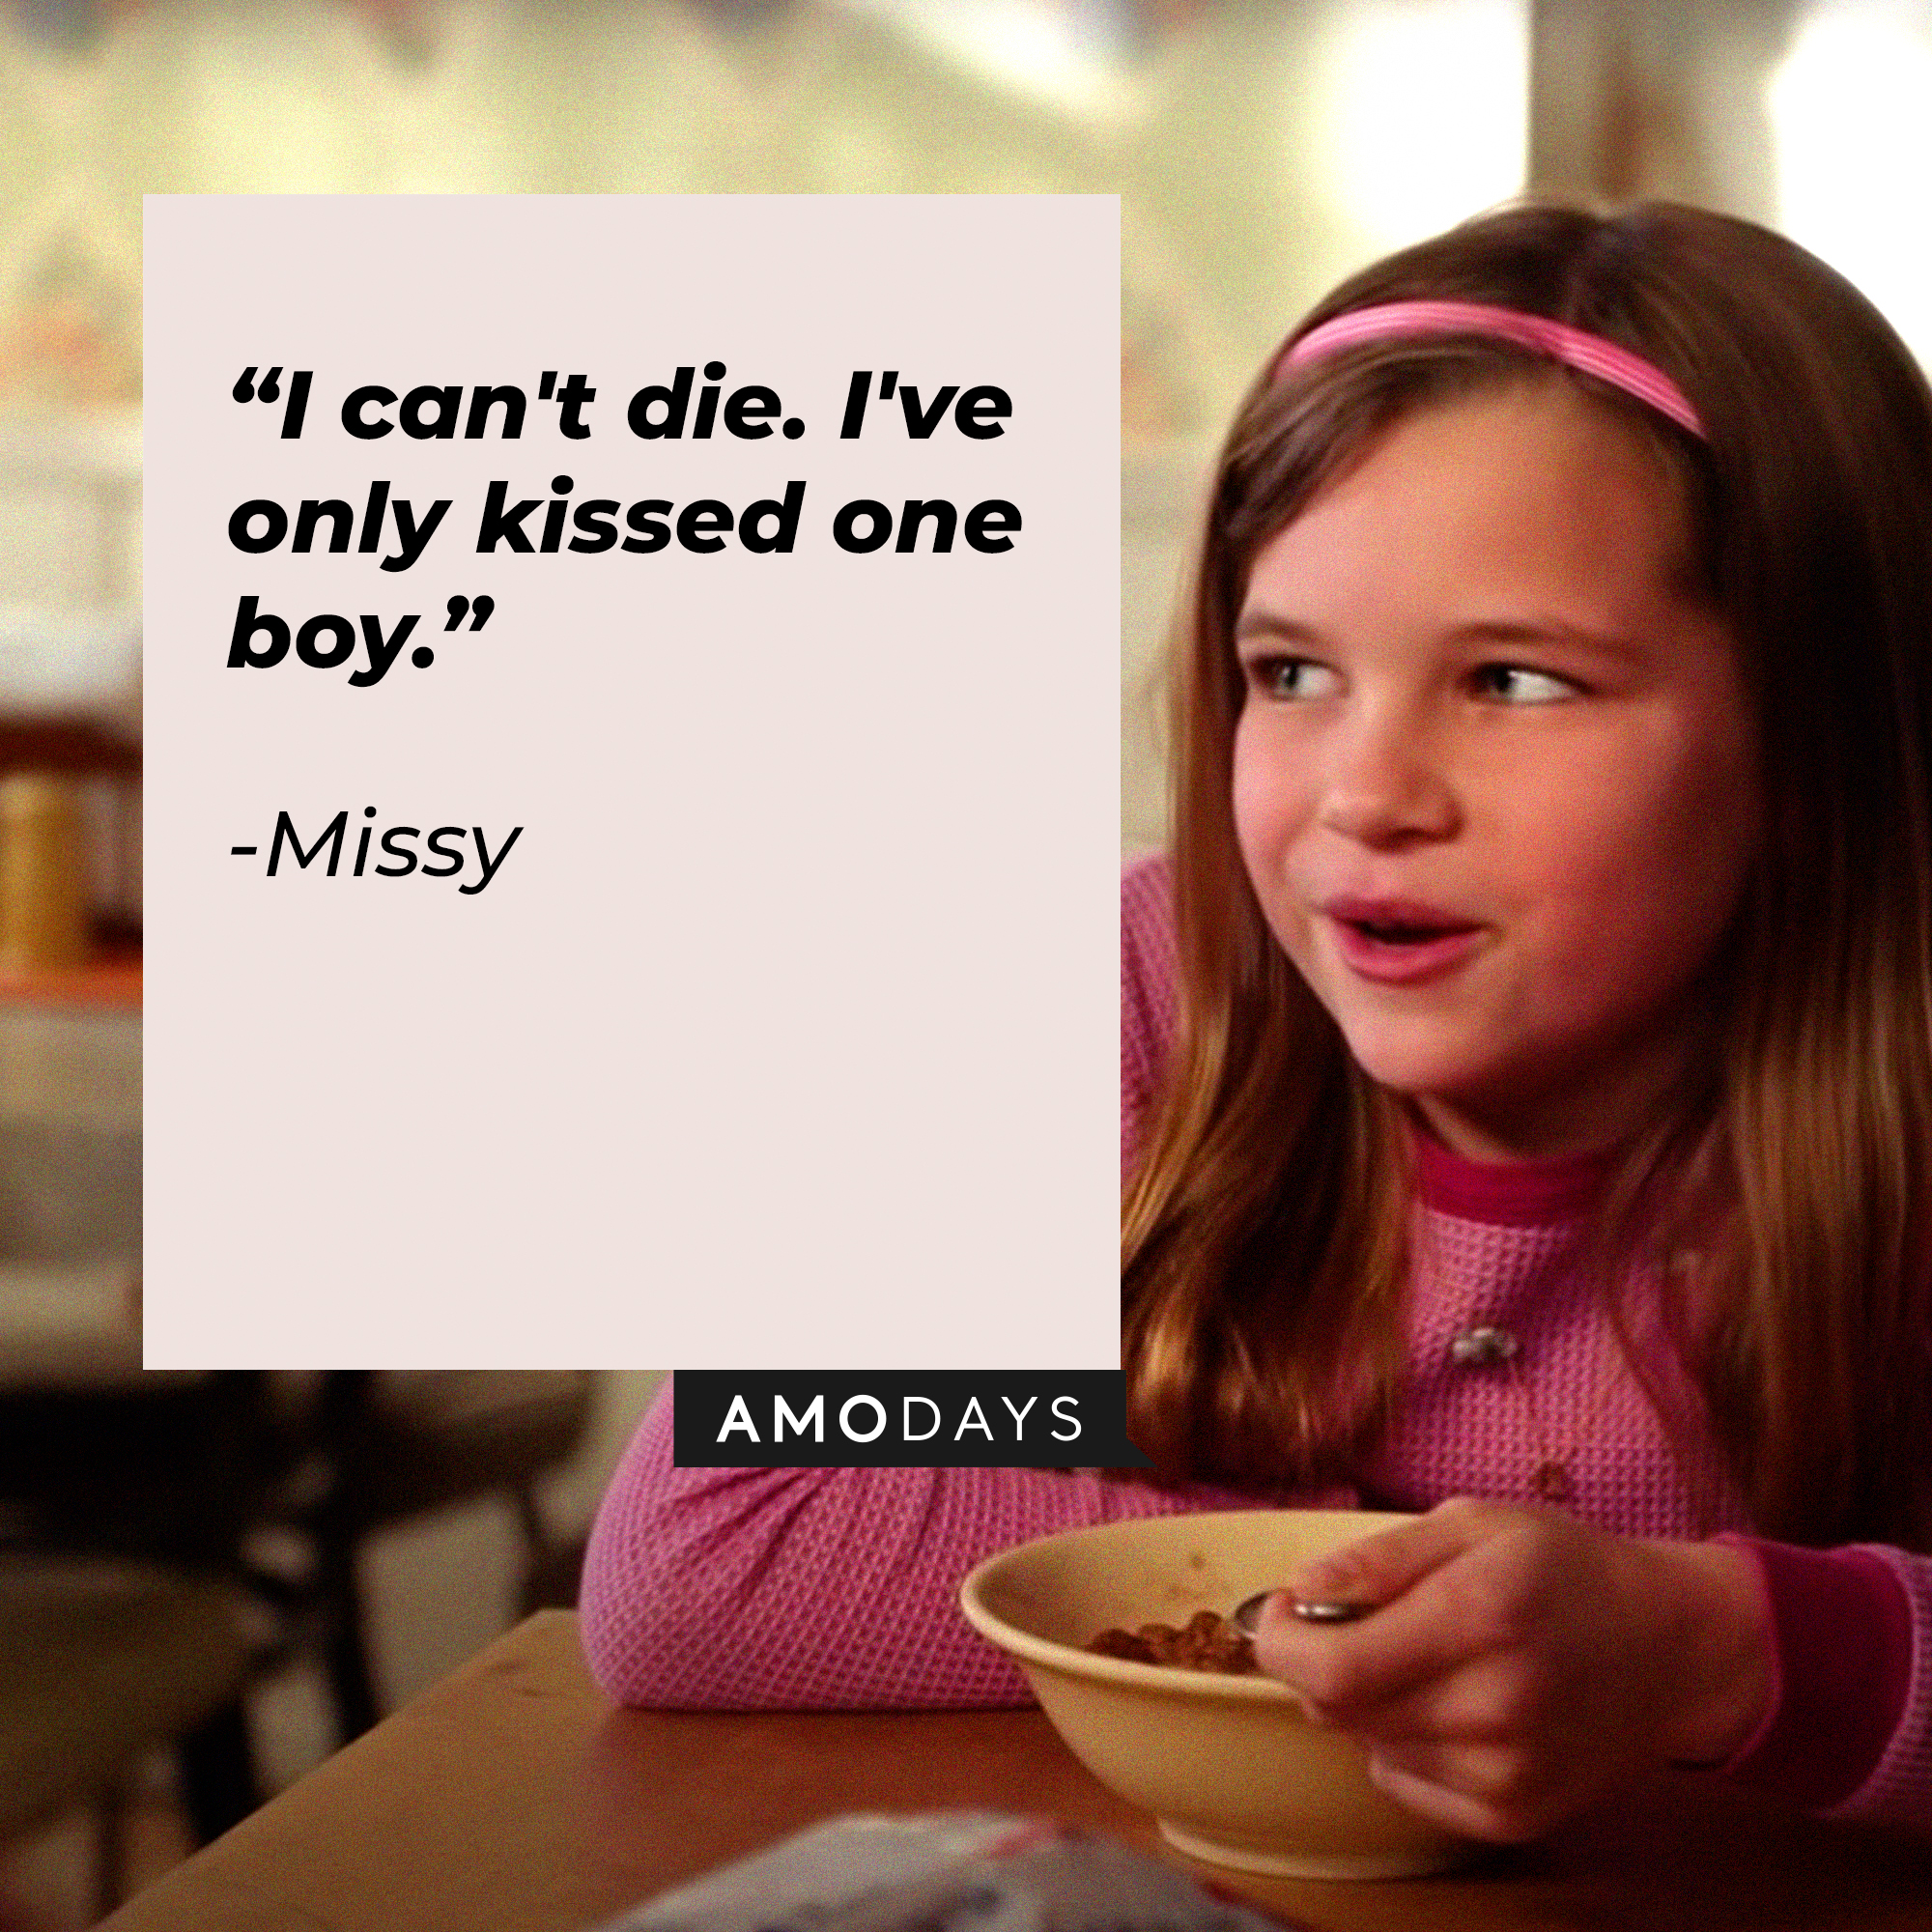 Missy's quote: “I can't die. I've only kissed one boy." | Source: facebook.com/YoungSheldonCBS